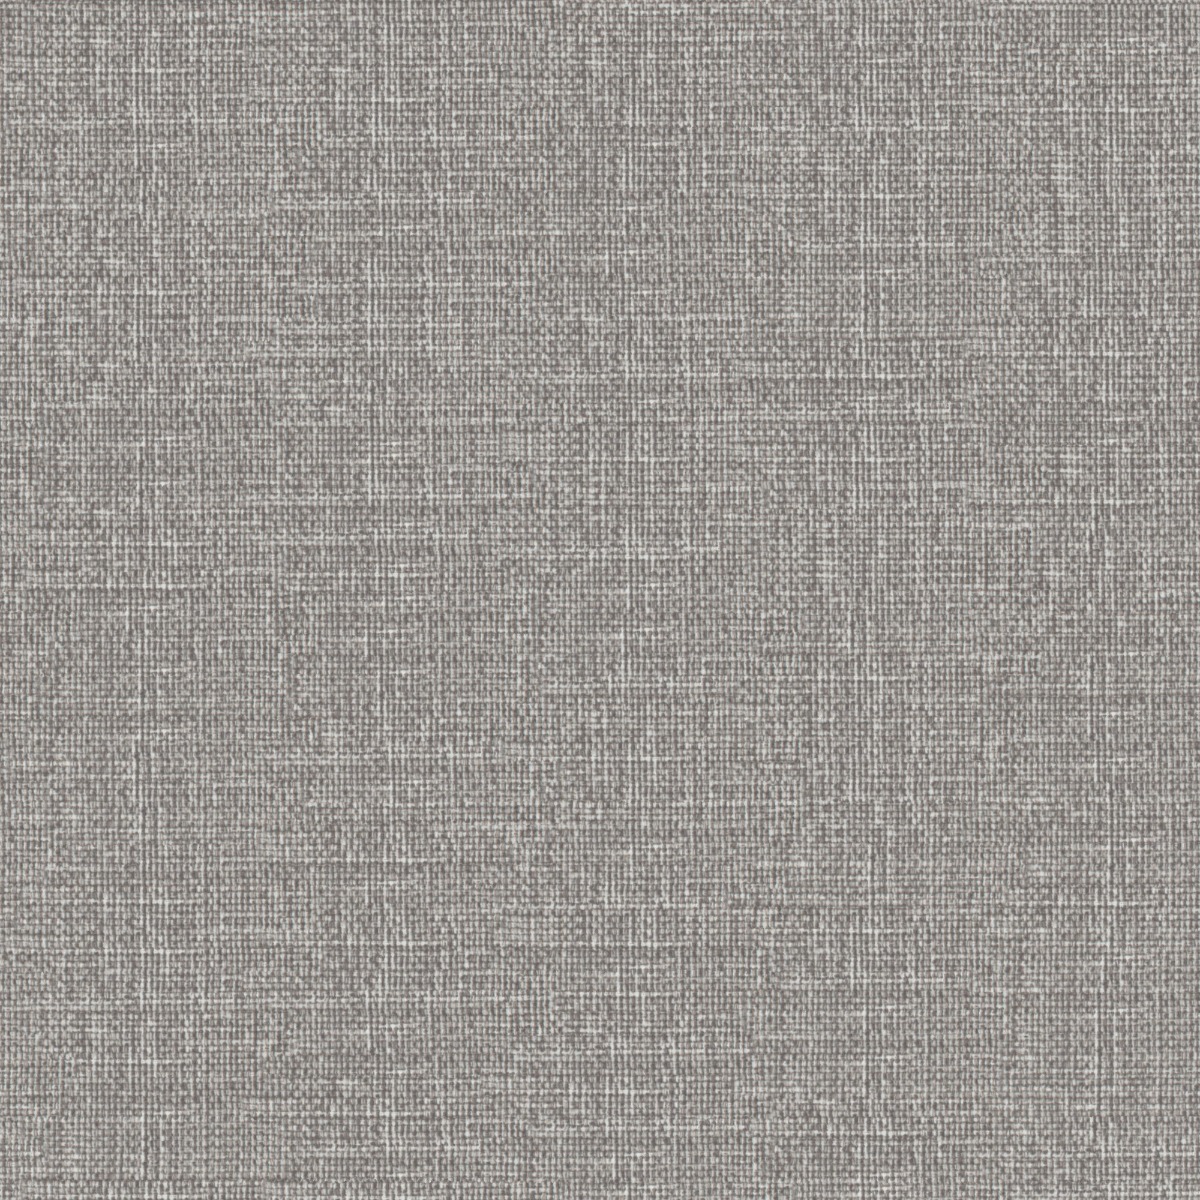 A seamless fabric texture with plain grey velvet units arranged in a None pattern